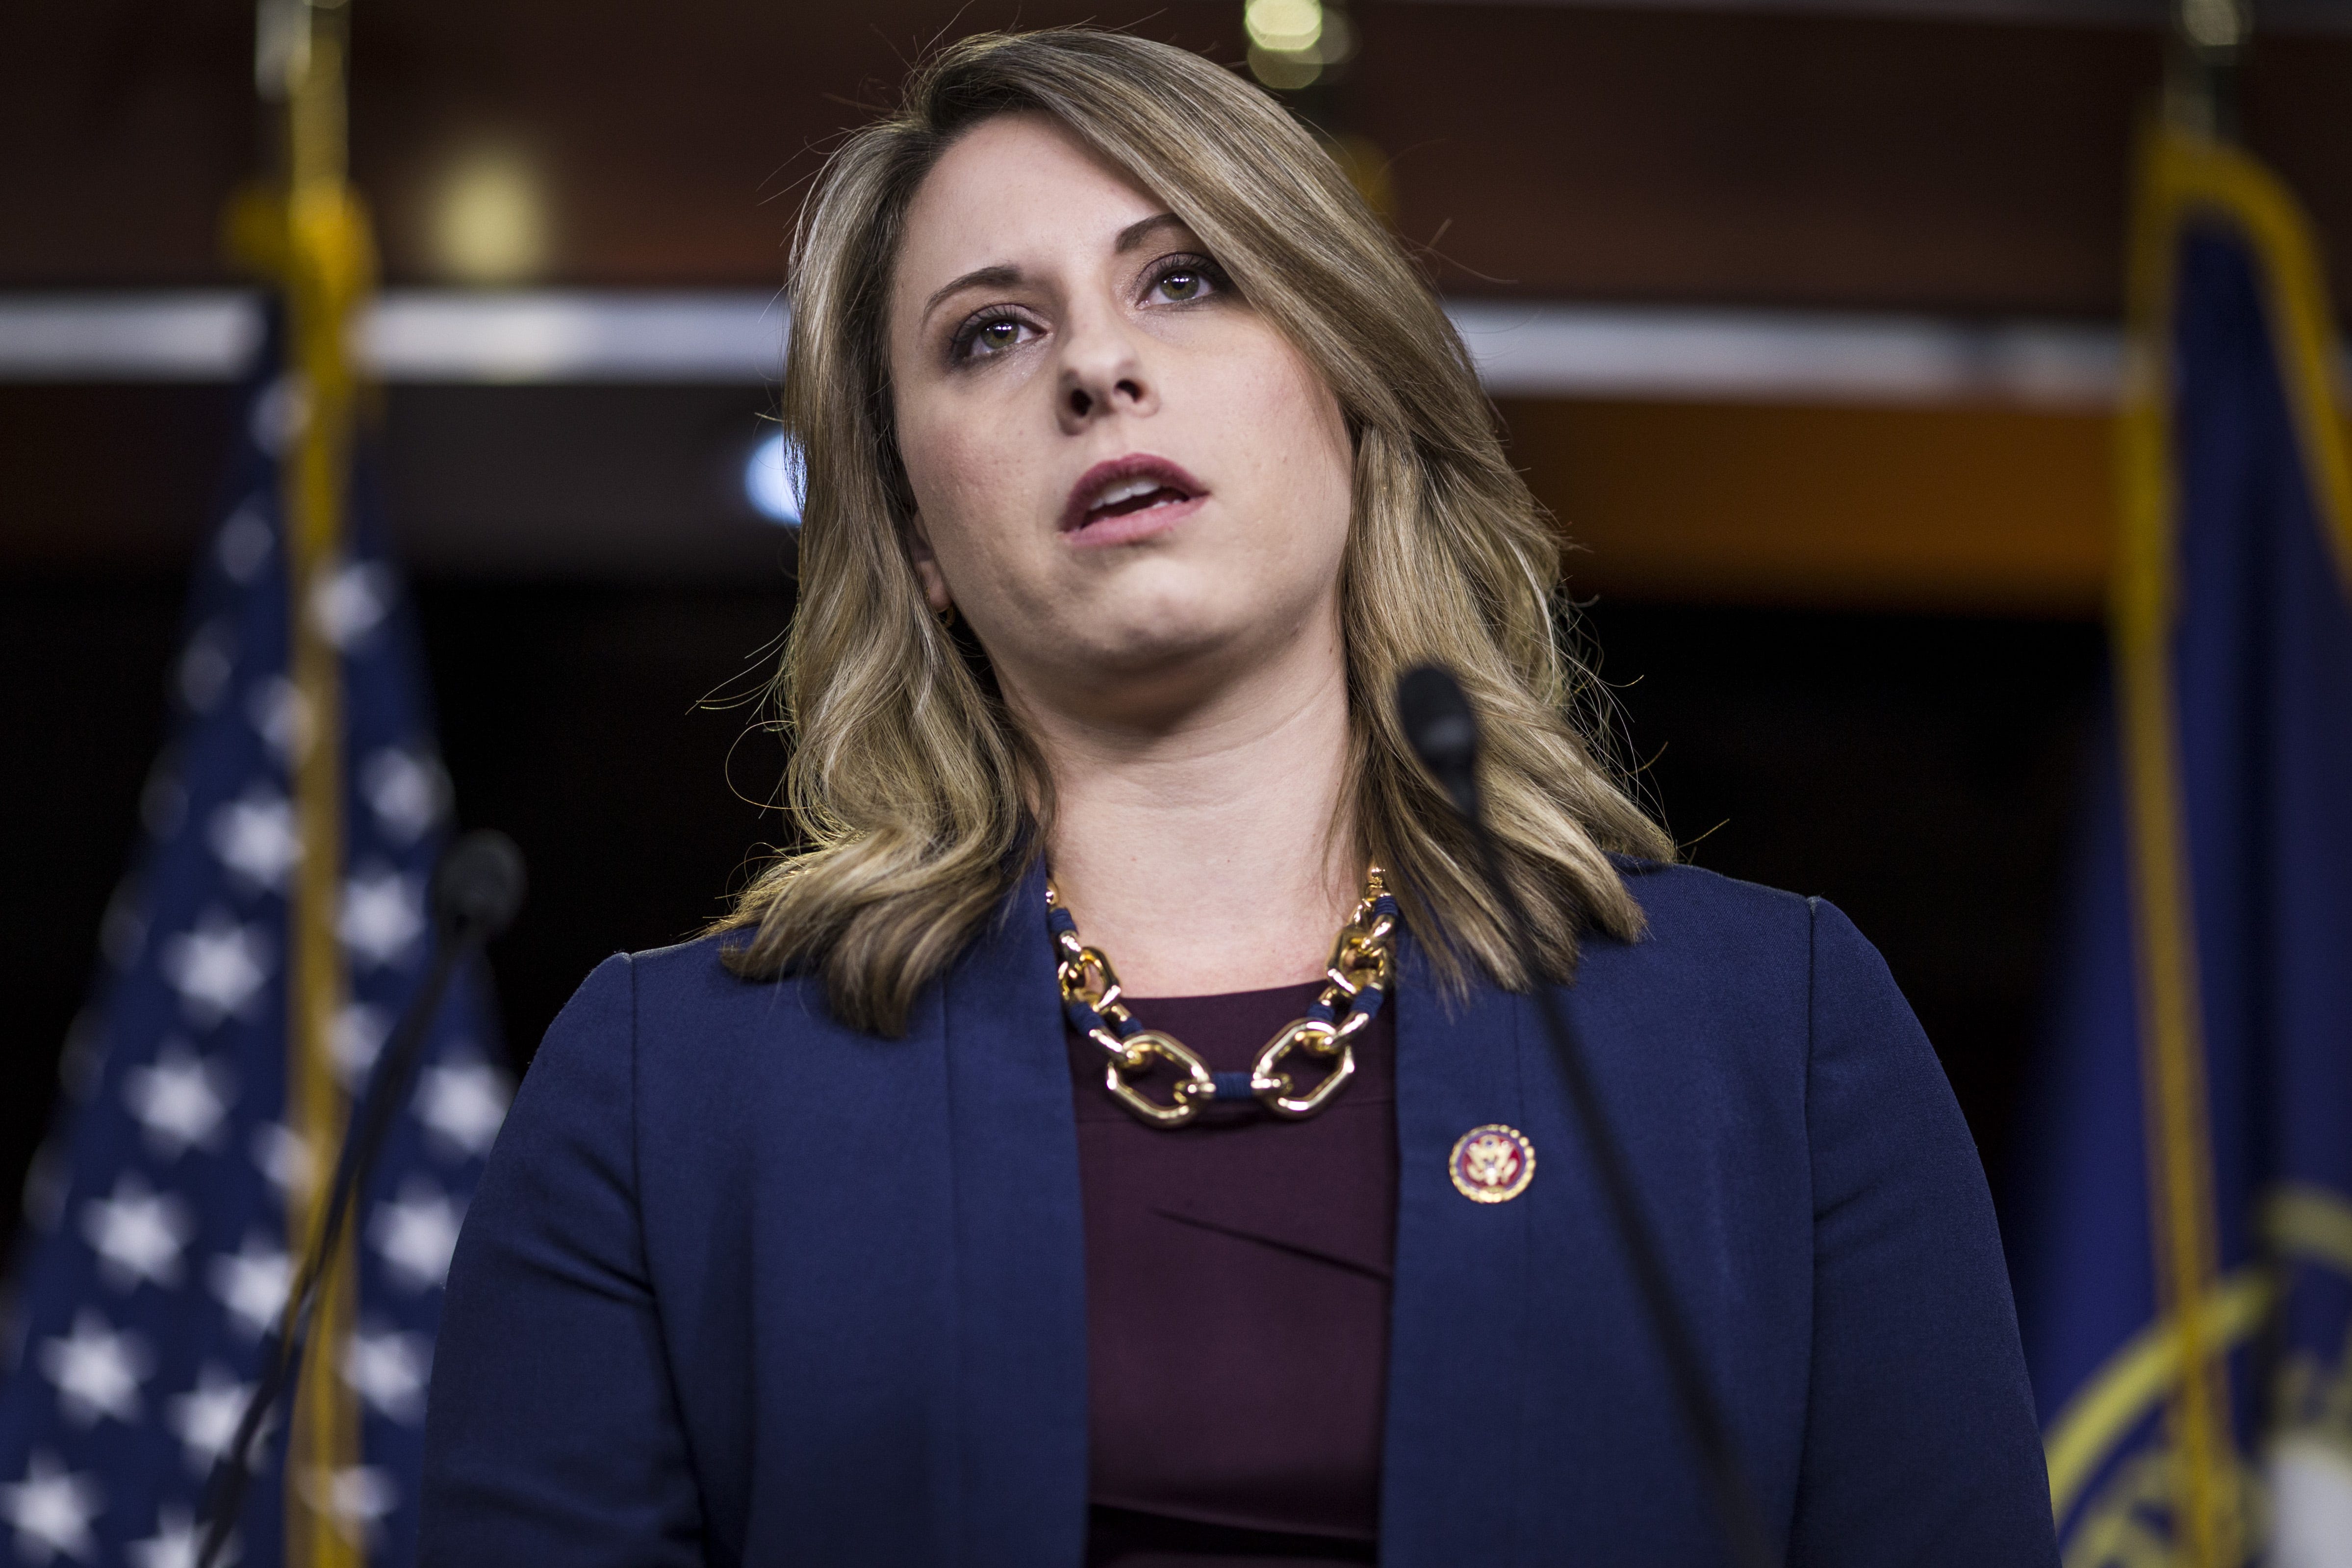 Breaking news: Katie Hill's resignation is about much more than an alleged affair and explicit photos